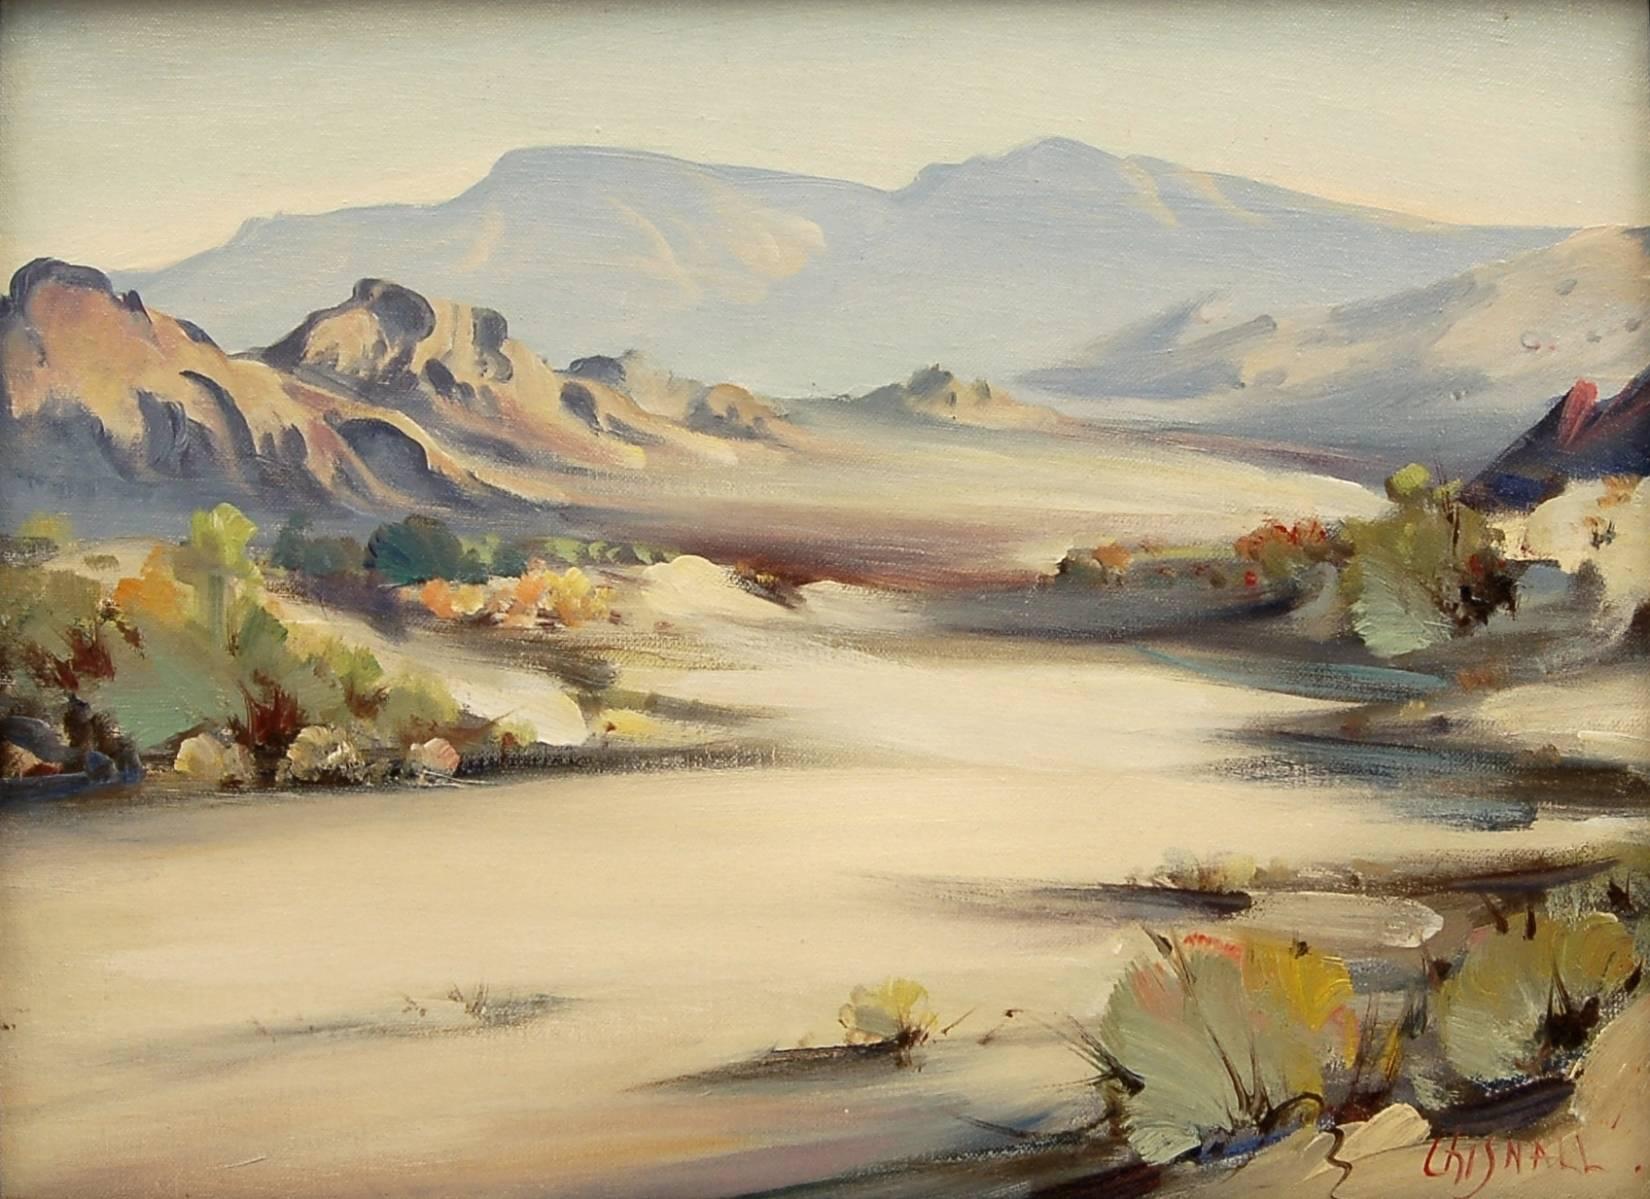 Gorgonio Mt. Near Palm Springs, CA - Painting by Frederick Richard Chisnall